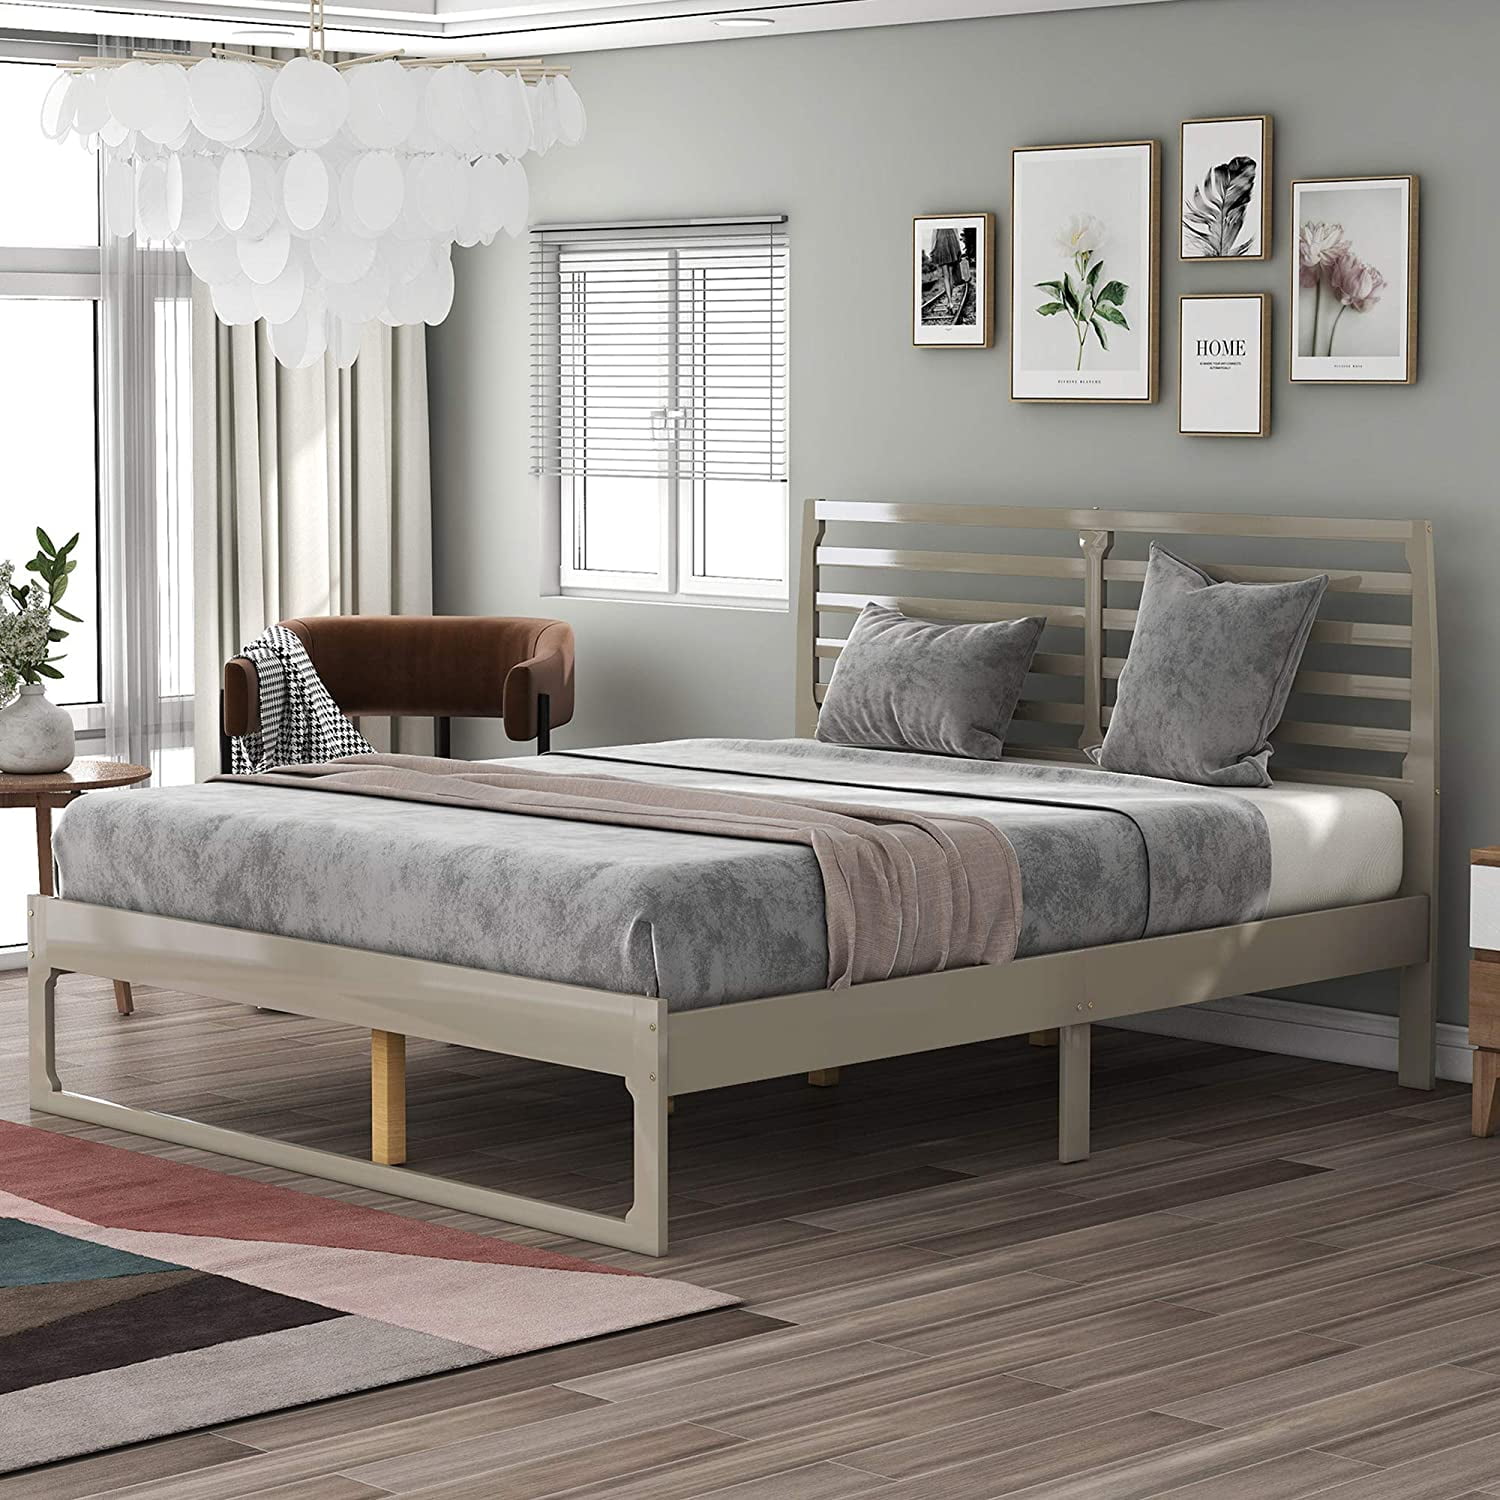 Piscis Wood Platform Bed King Size, King Size Wooden Bed Frame Without Headboard